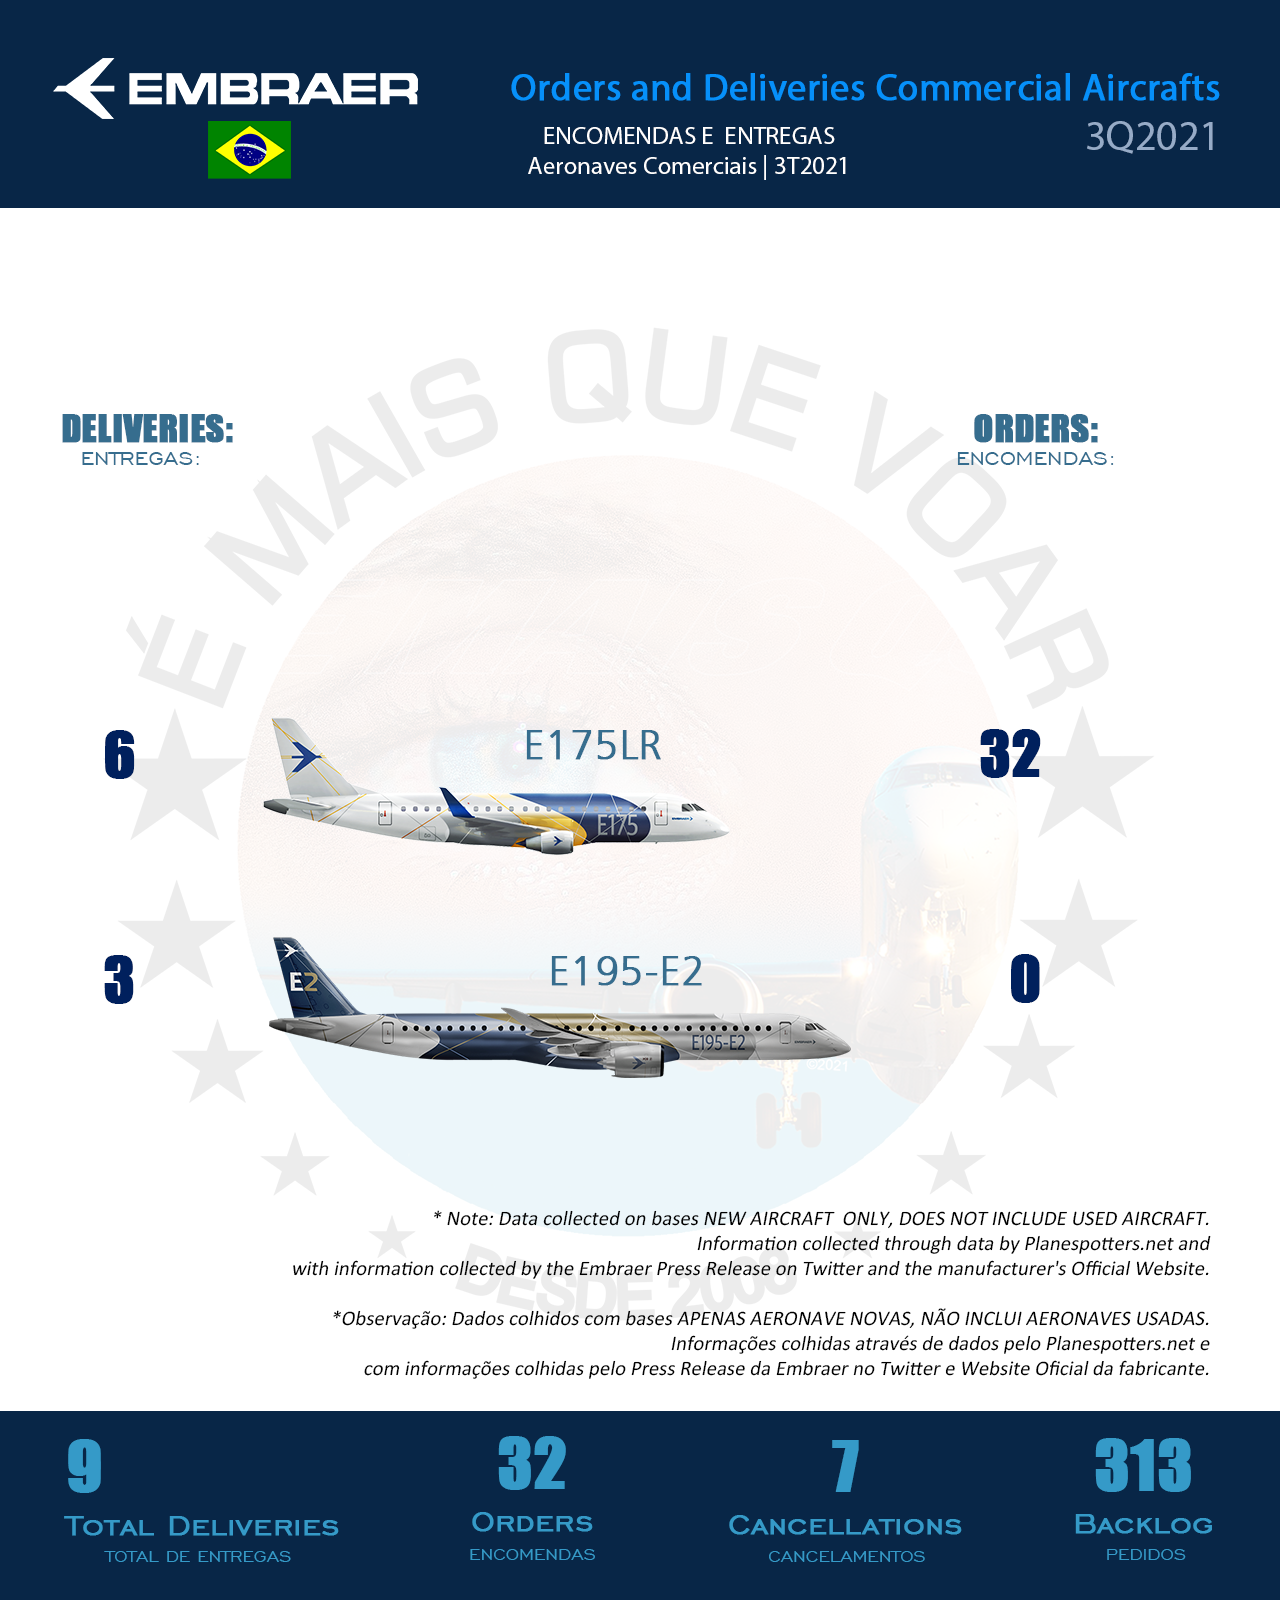 Embraer -  devieries and orders in the third quarter of 2021 (3Q21)